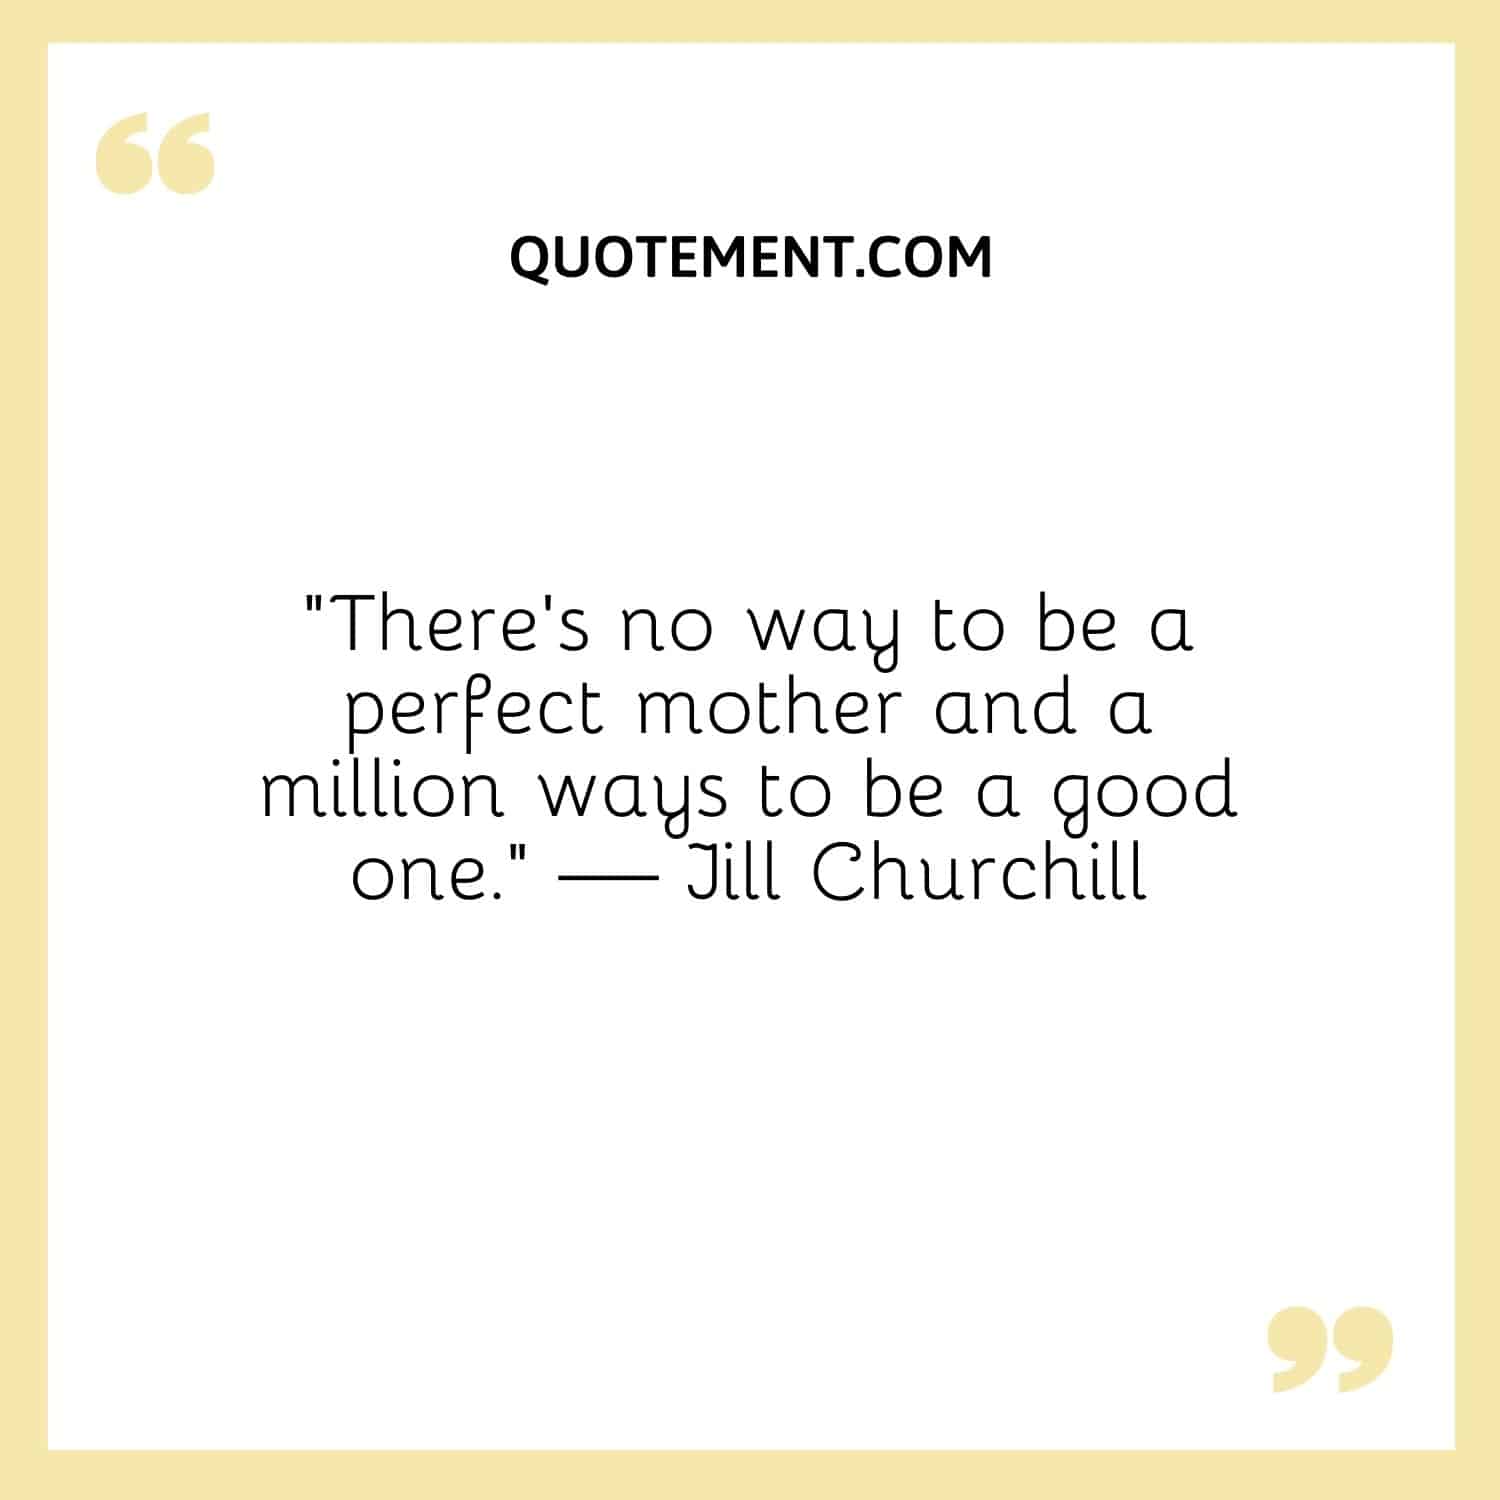 There’s no way to be a perfect mother and a million ways to be a good one